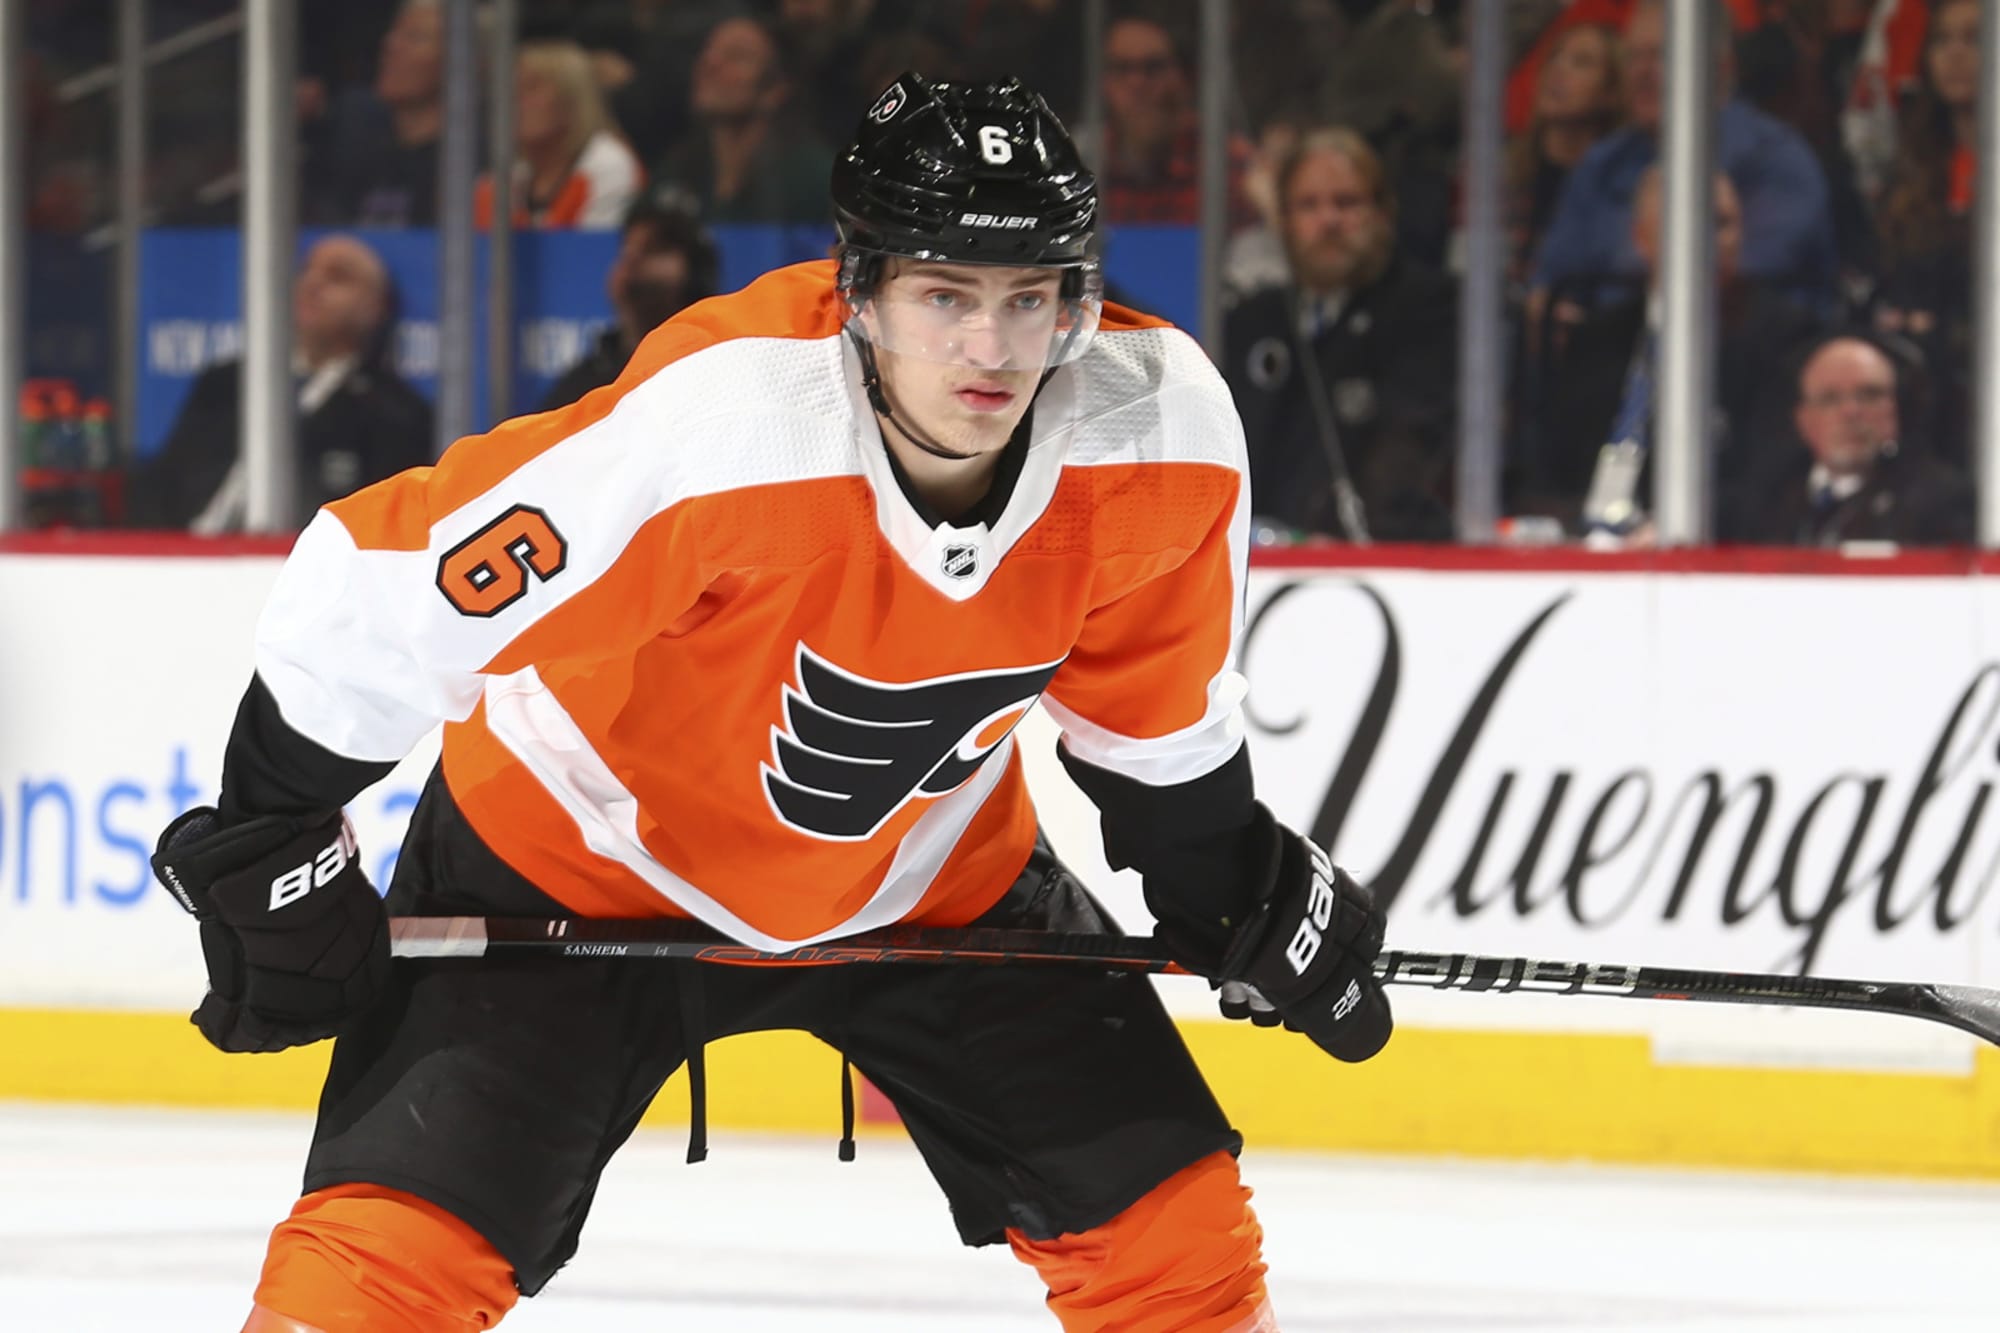 NHL Rumour Roundup: Could Flyers' Laughton be on the move?